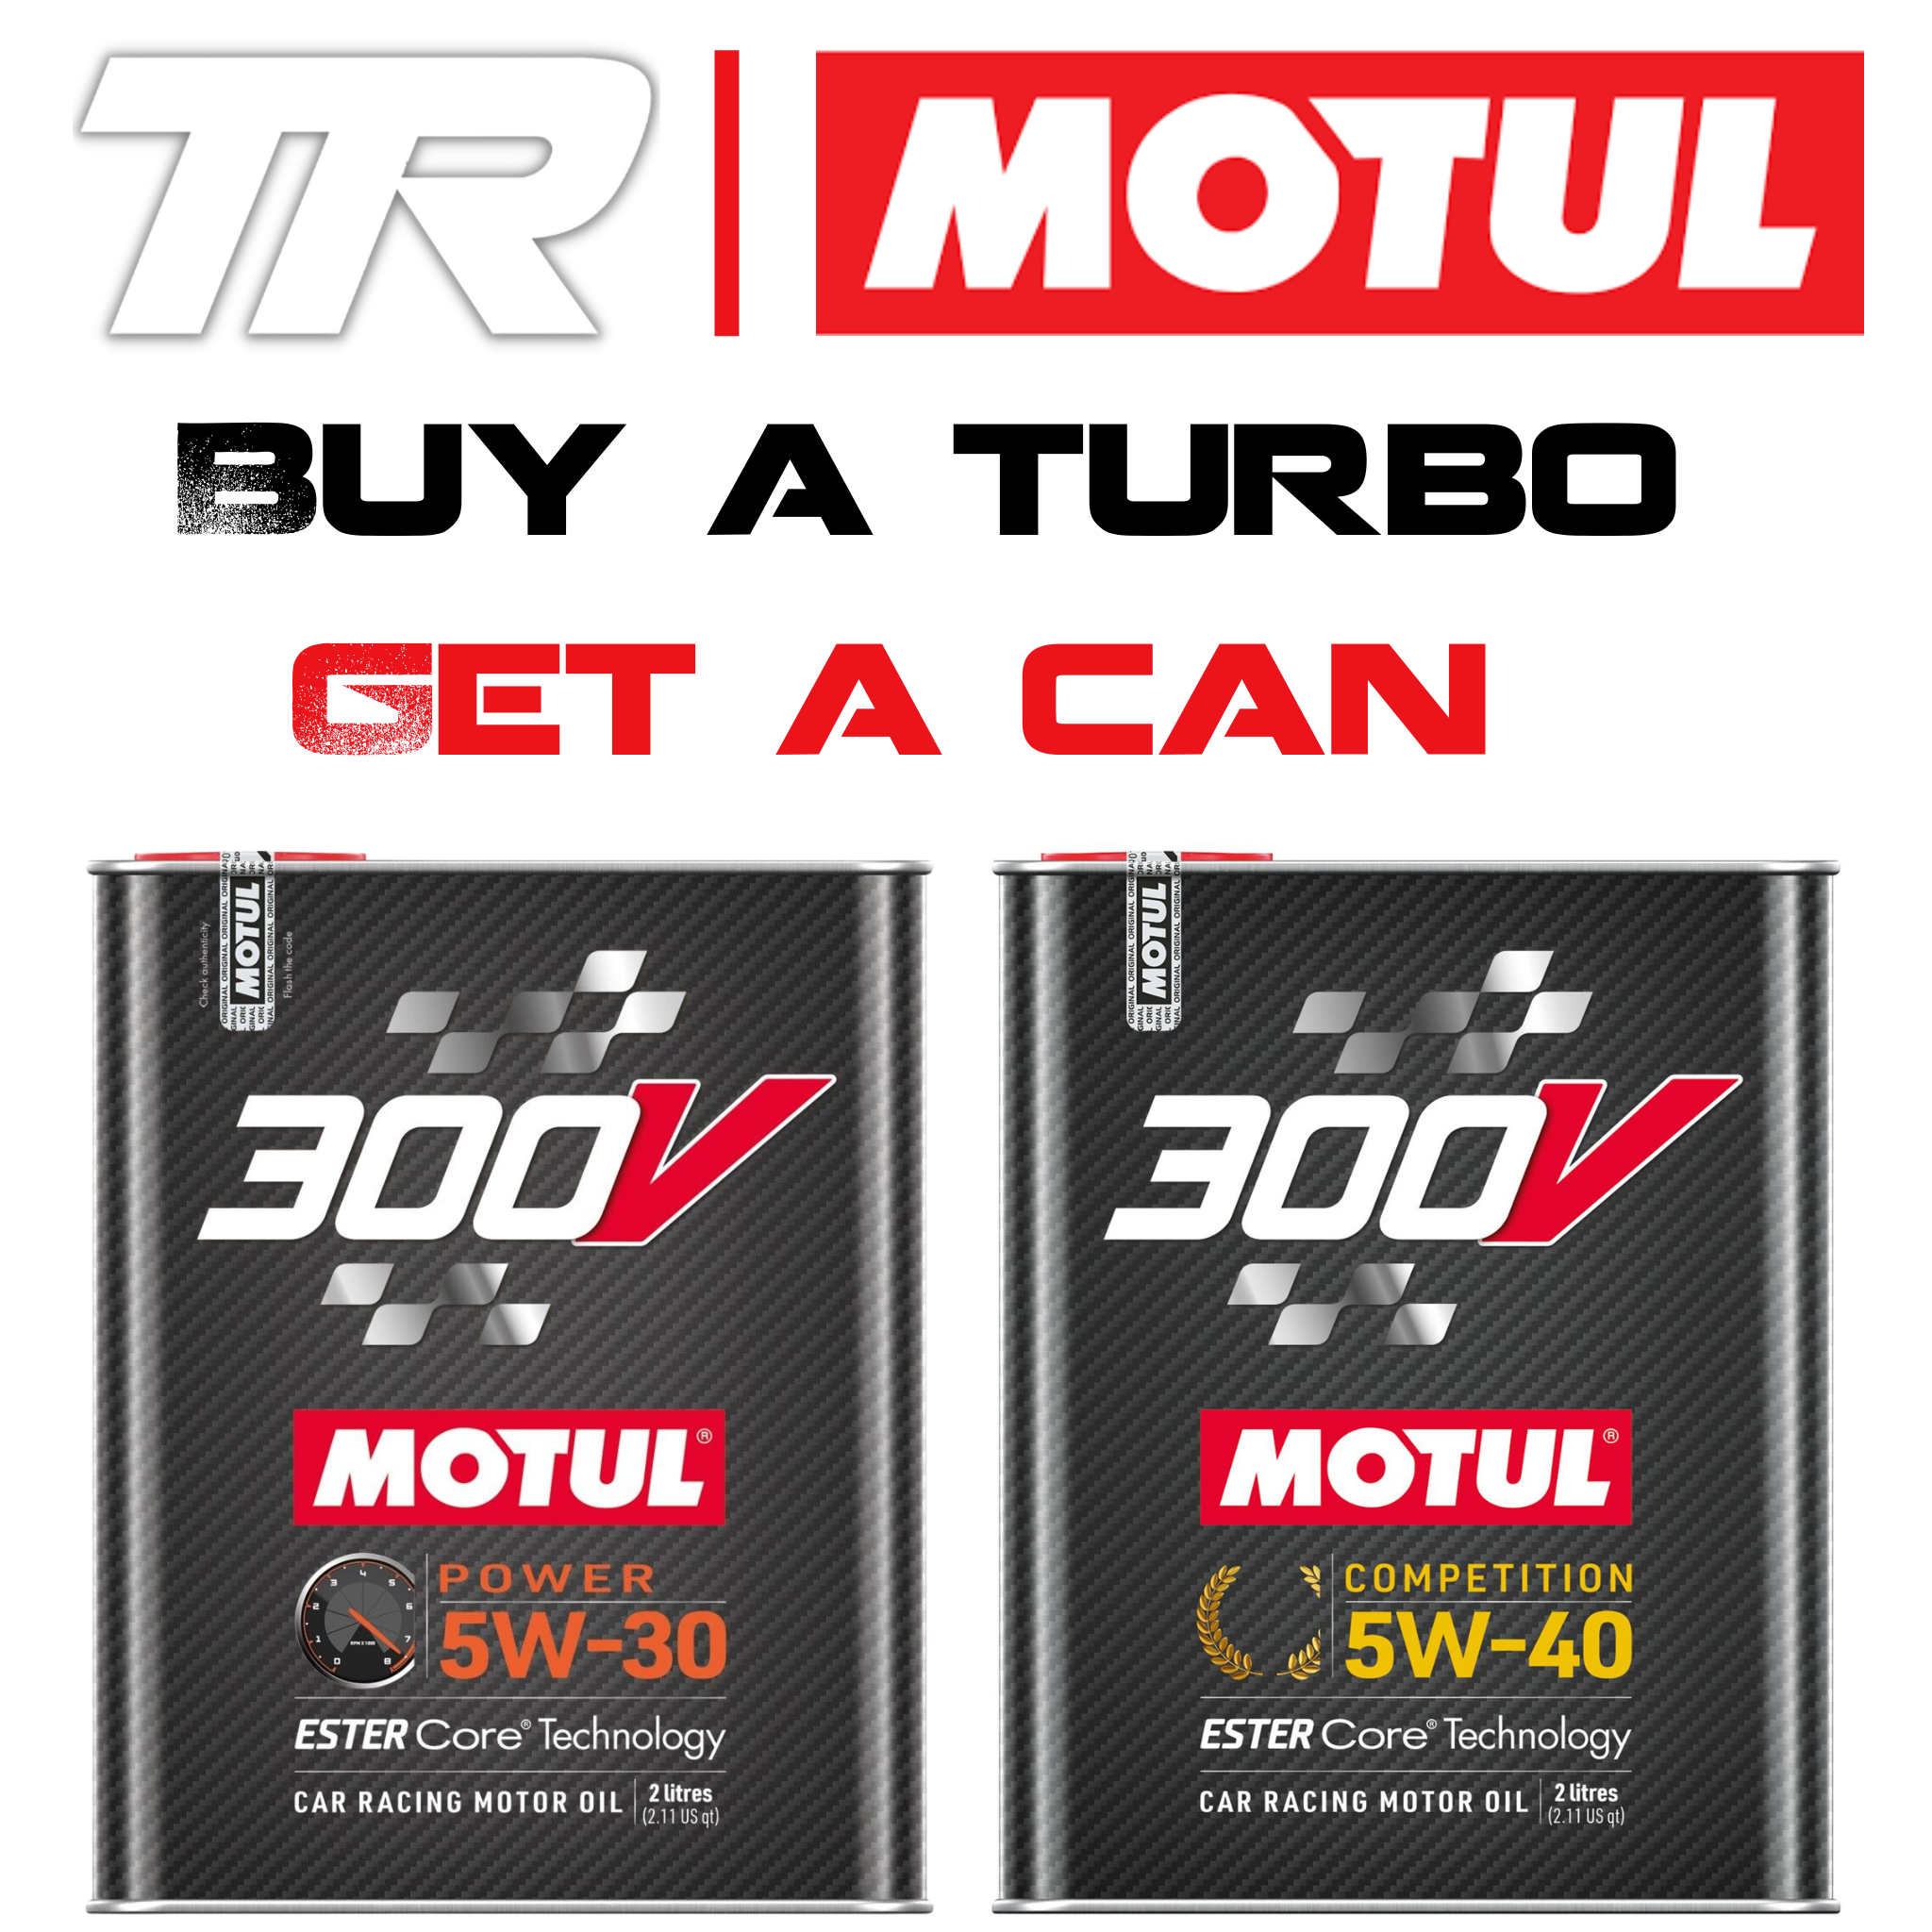 TR TD06-20G Turbo for Subaru (flange outlet) and Motul 300V Power & Competition